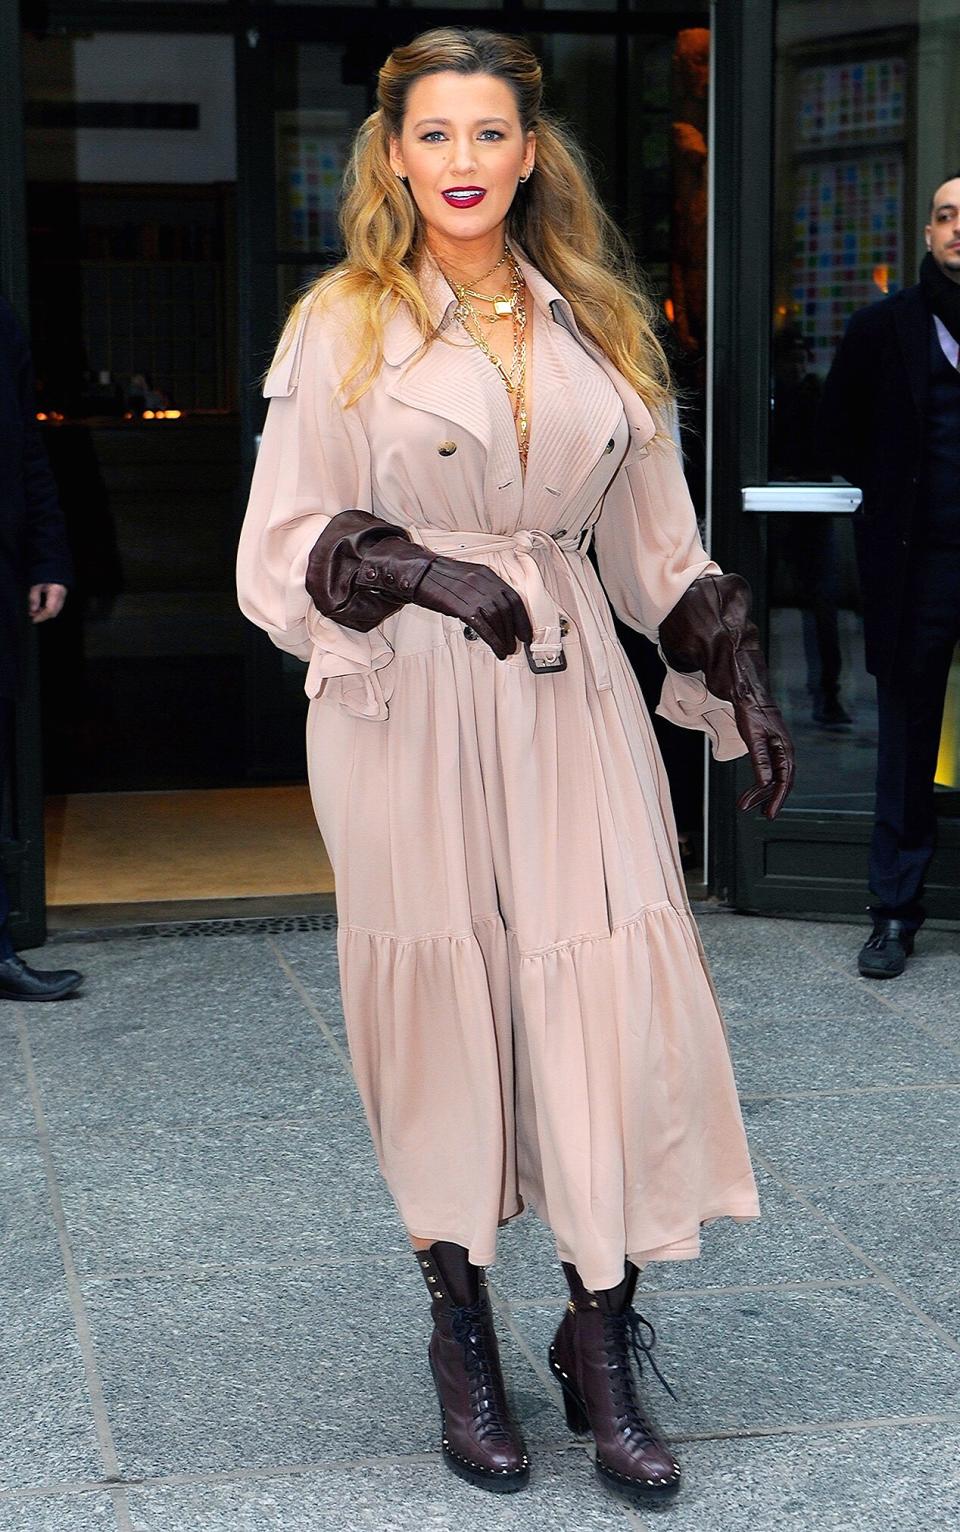 The Way Blake Lively Just Styled Her Pink Trench Is So Cool